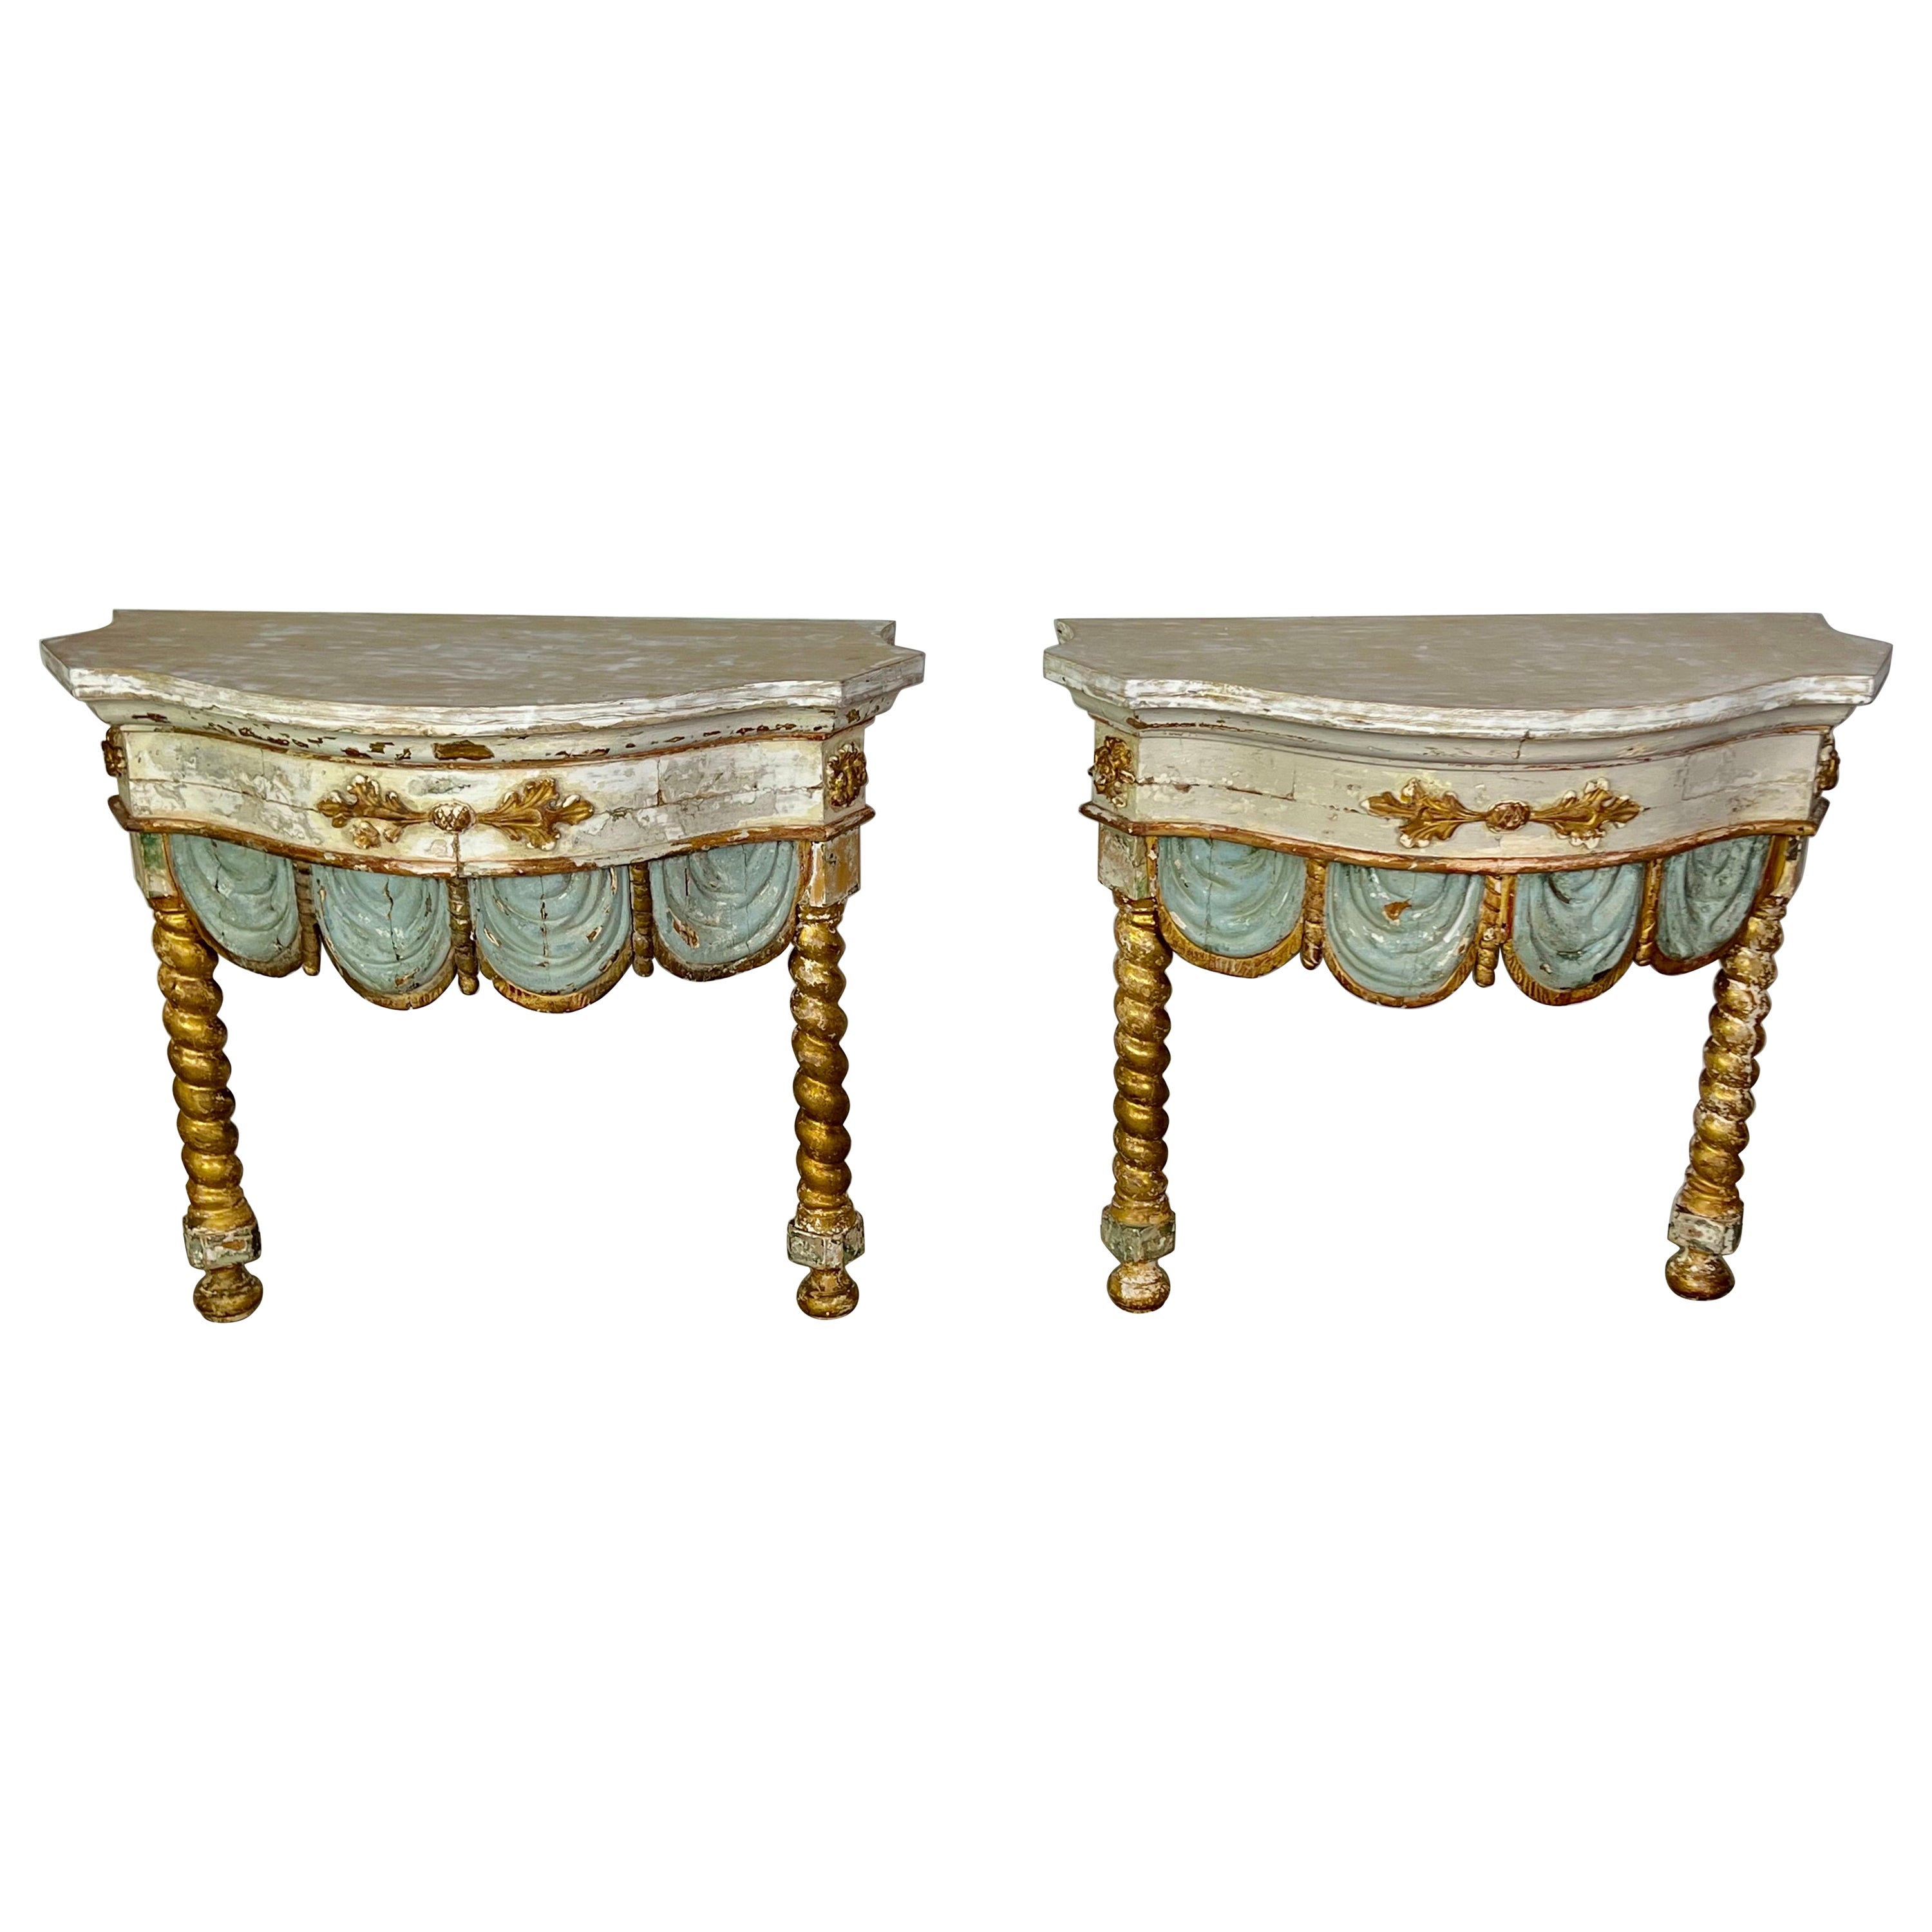 Pair of 19th century Italian Painted and Parcel Gilt Consoles